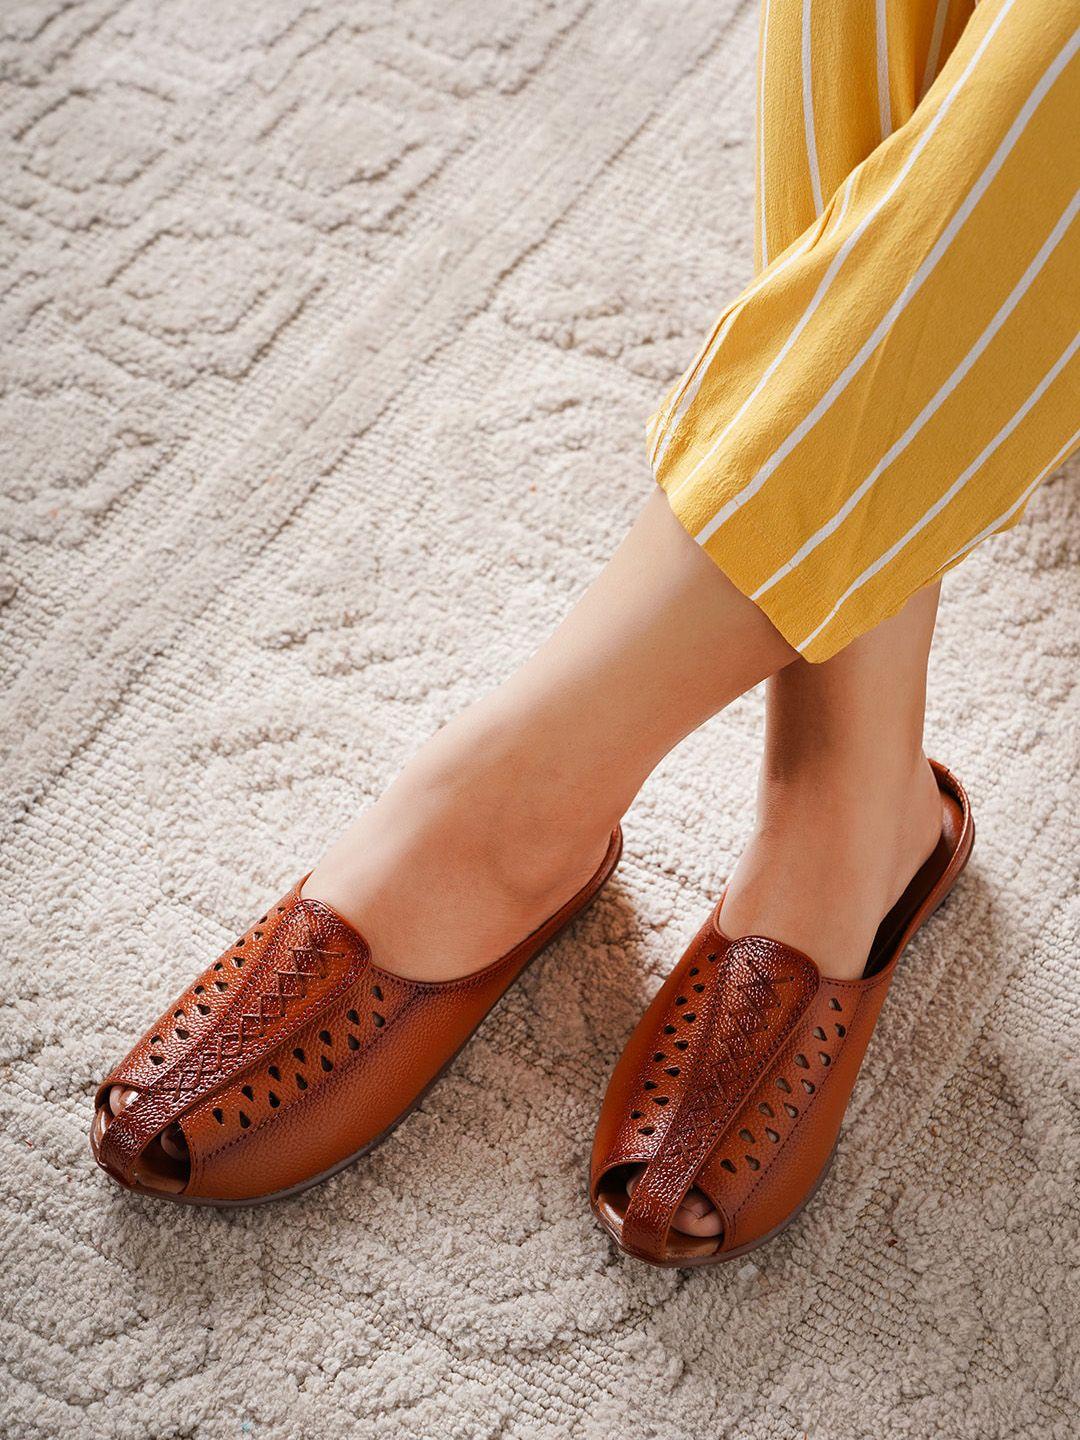 shezone women tan leather mules with laser cuts